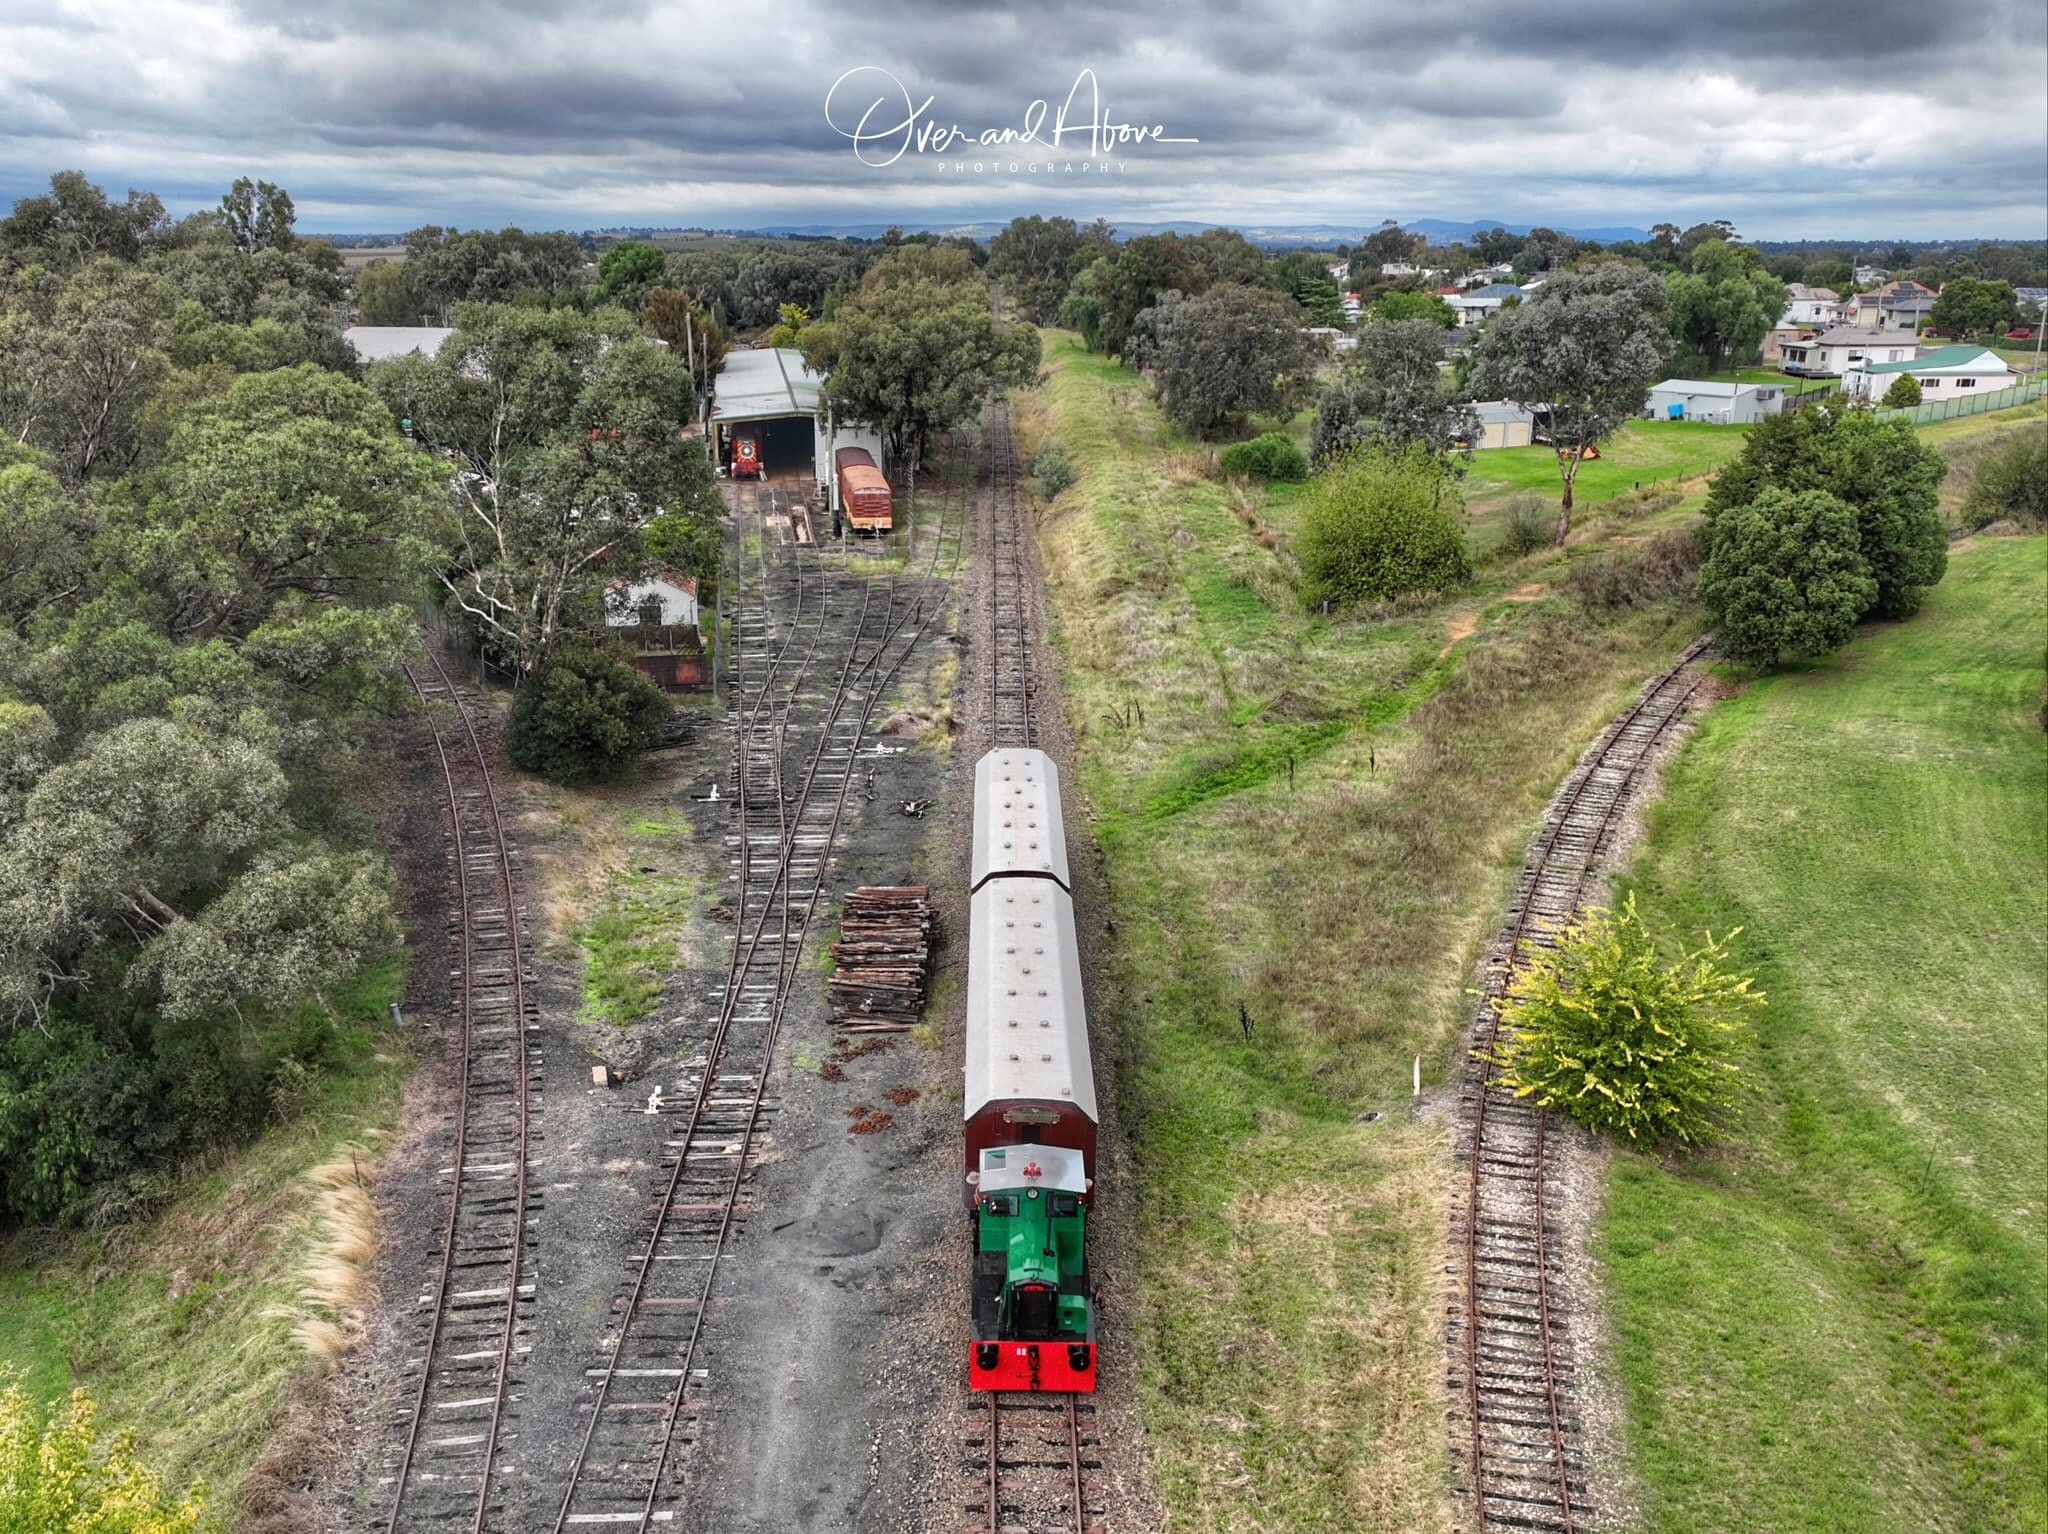 COWRA TOURIST RAILWAY 🚂🛤️

Running the last weekend of the month, view the gorgeous autumn countryside from the beautifully restored Planet 52 and two R cars on board a trip from the heritage listed Cowra Railway Station to the Lachlan Bridge and b